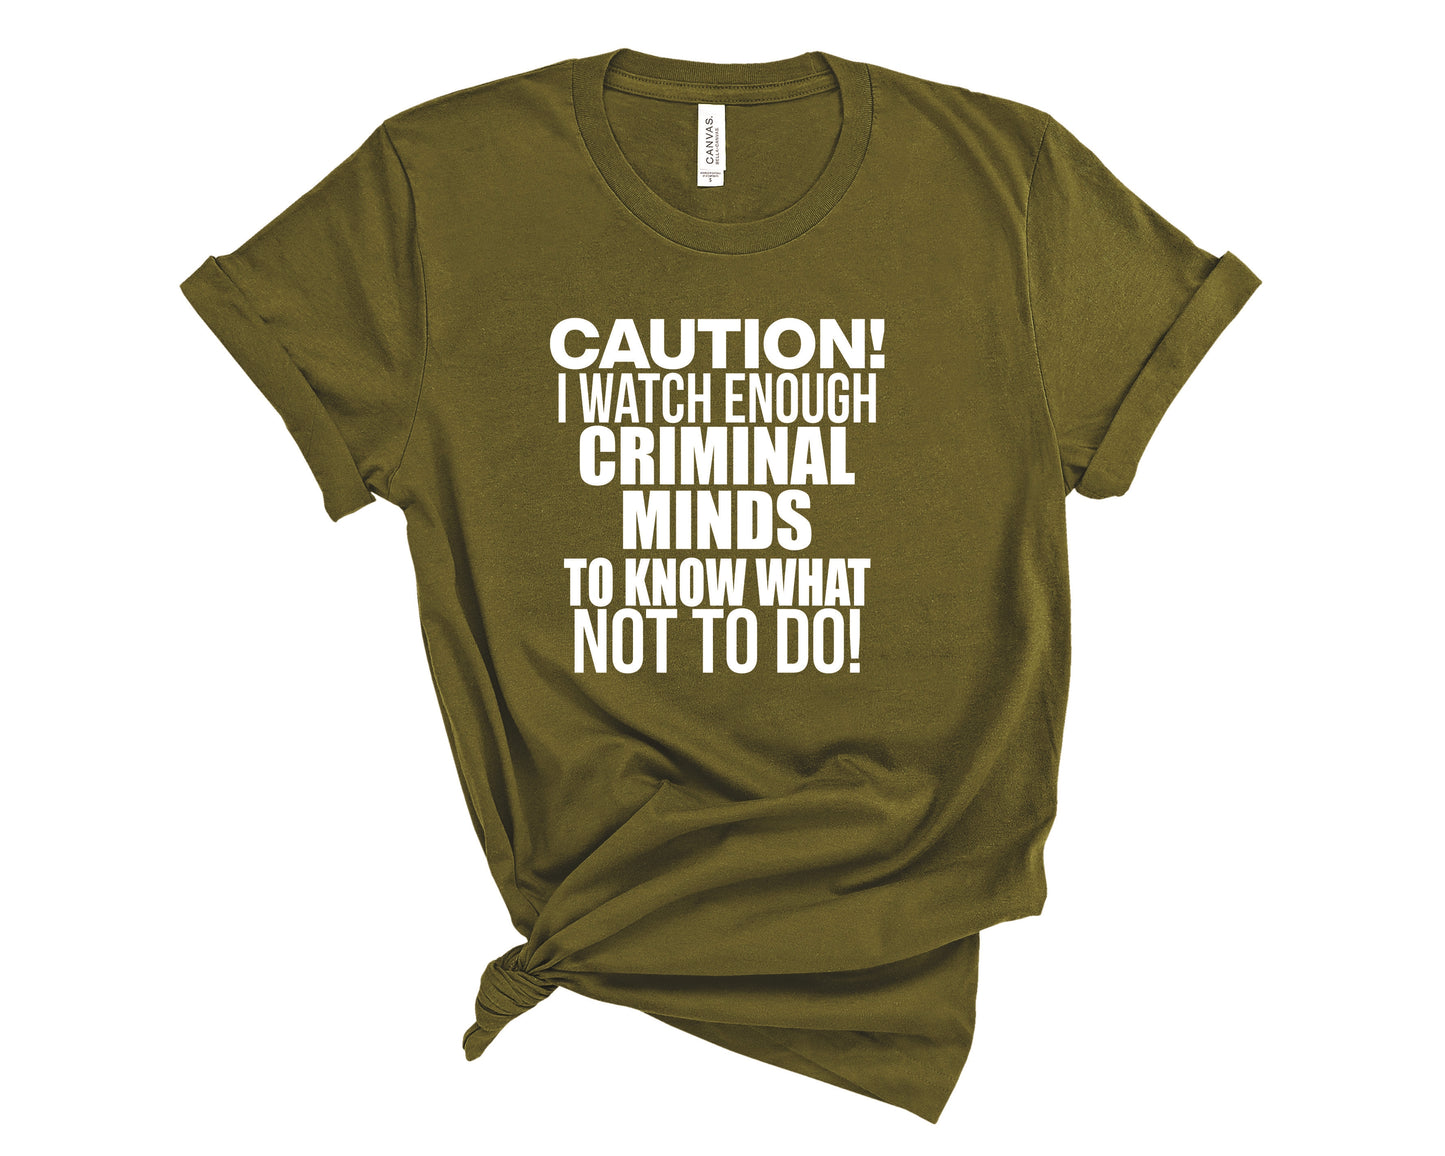 Caution! I Watch Enough Criminal Minds To Know What Not To Do! Tee